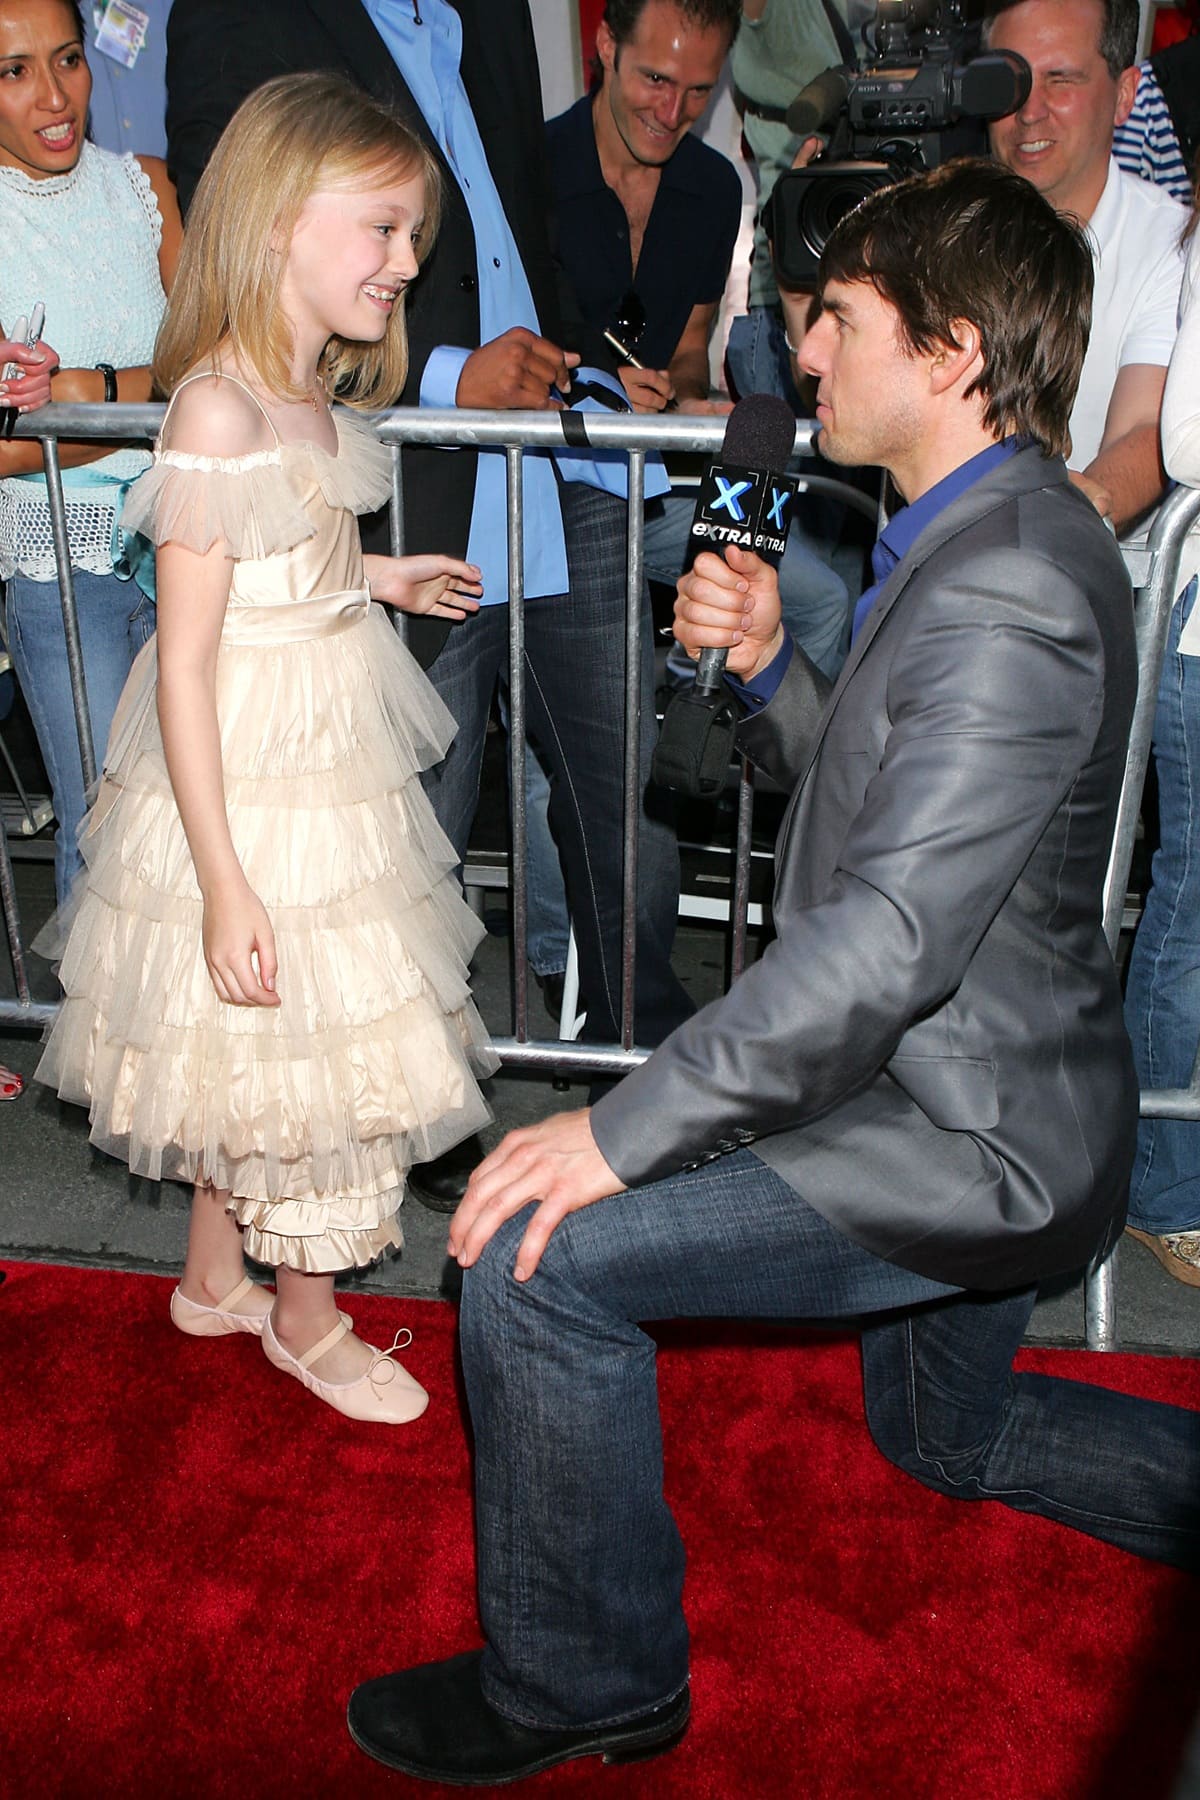 Tom Cruise and Dakota Fanning formed a close friendship during their time working together on "War of the Worlds," fostering a deep bond rooted in respect and admiration that extends beyond their on-screen roles